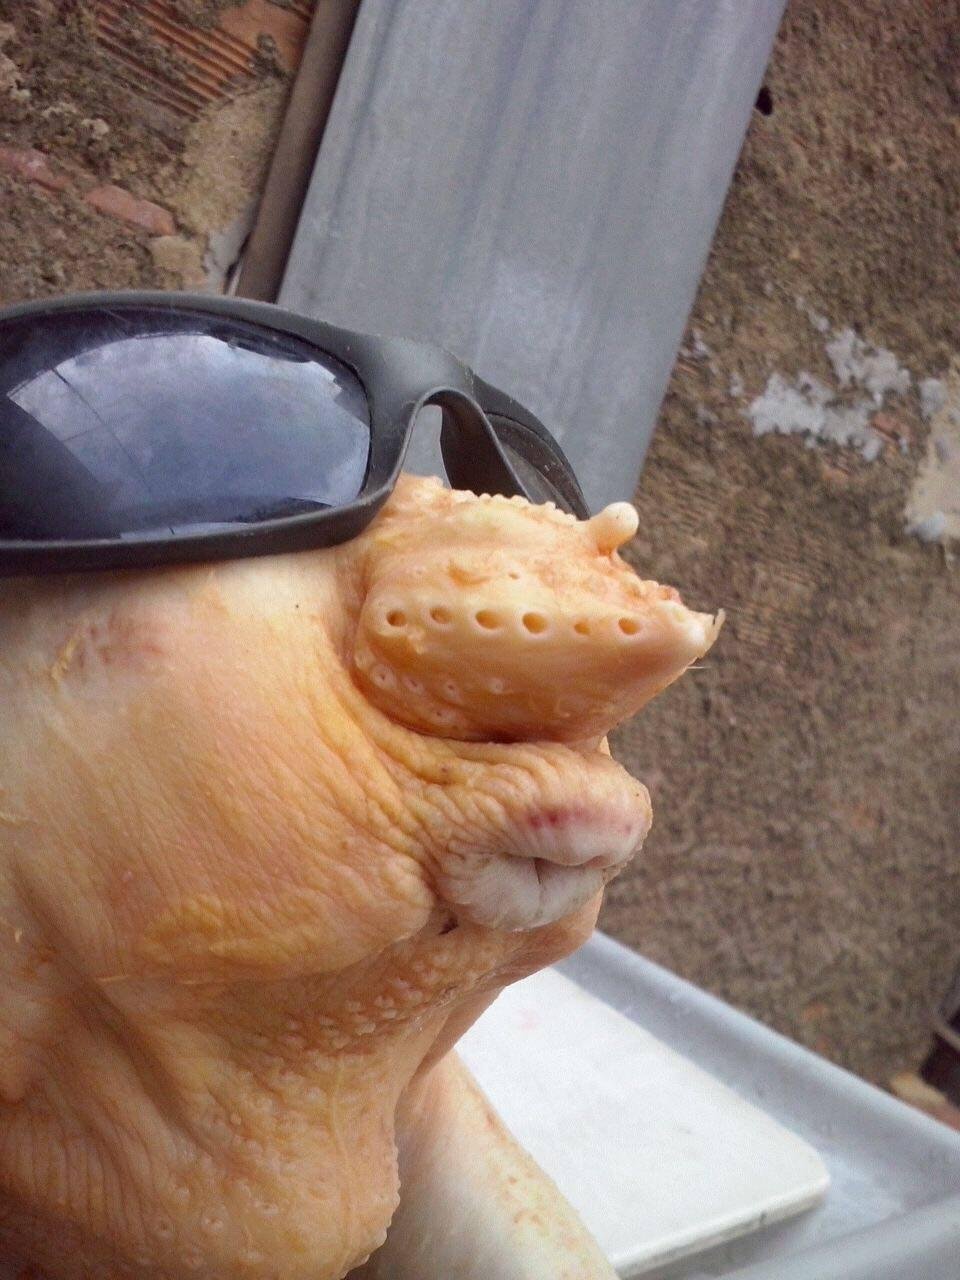 Cool looking chicken